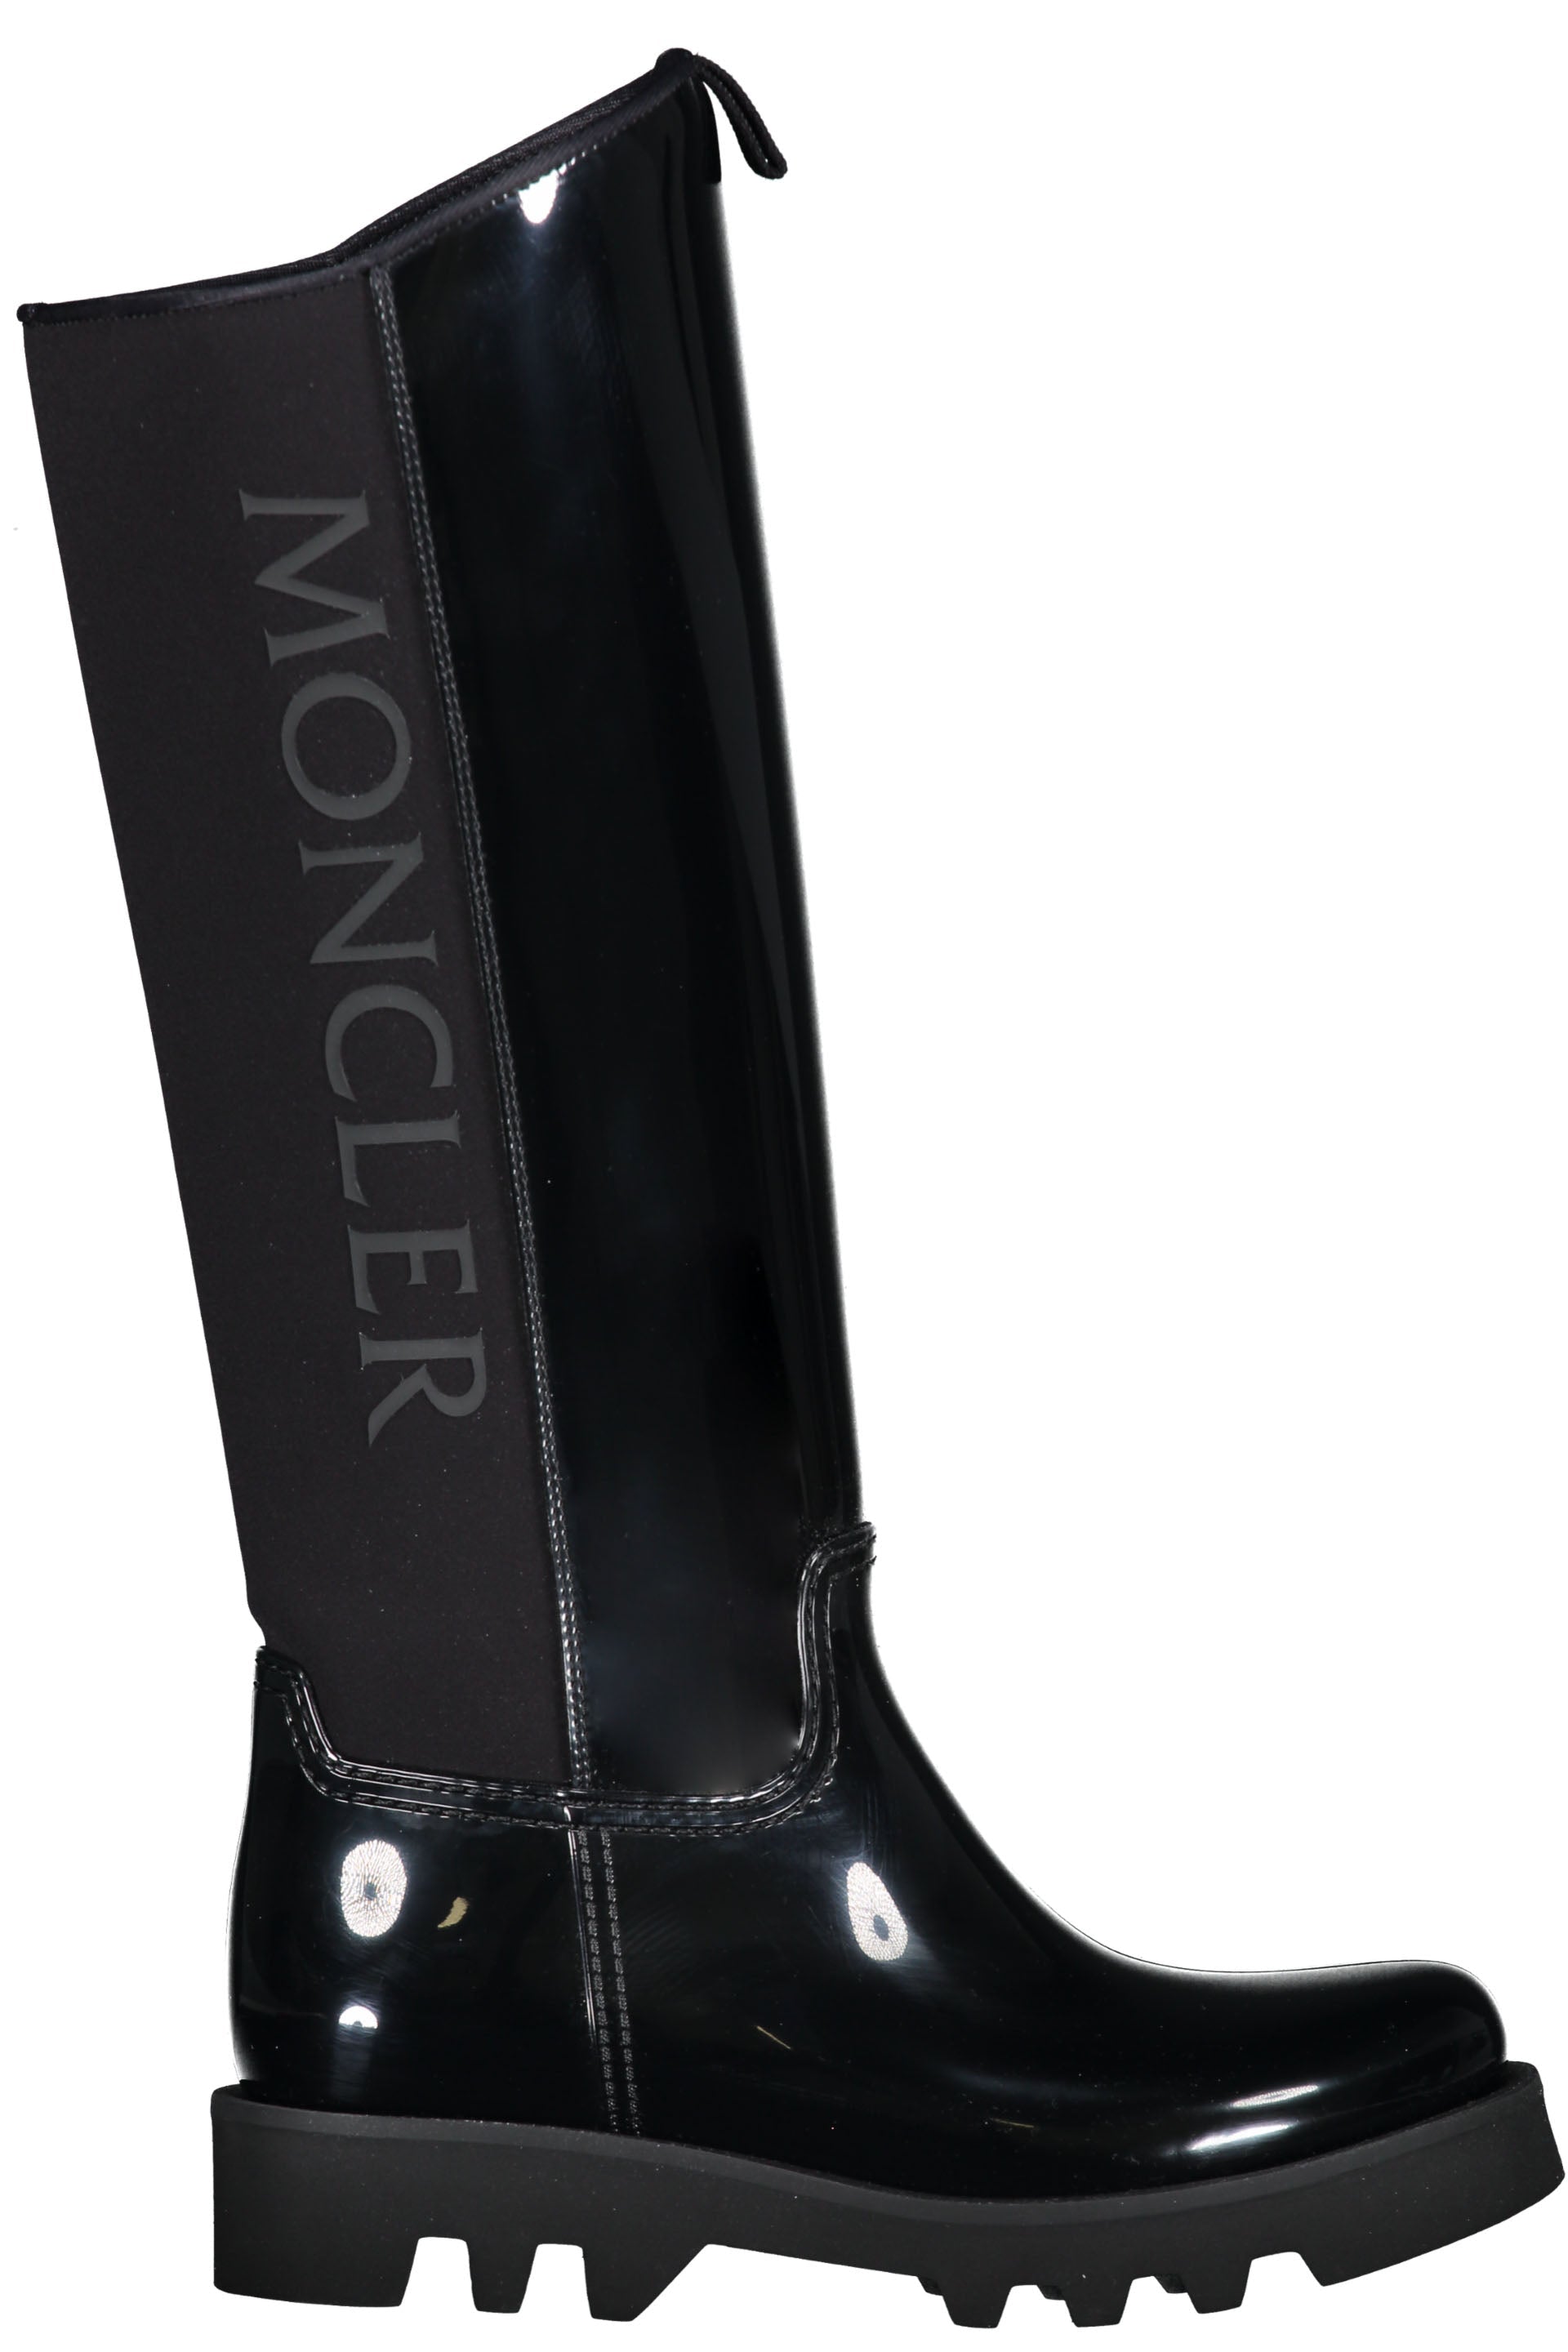 Moncler-OUTLET-SALE-Gilla-knee-boots-Stiefel-Stiefeletten-36-ARCHIVE-COLLECTION.jpg